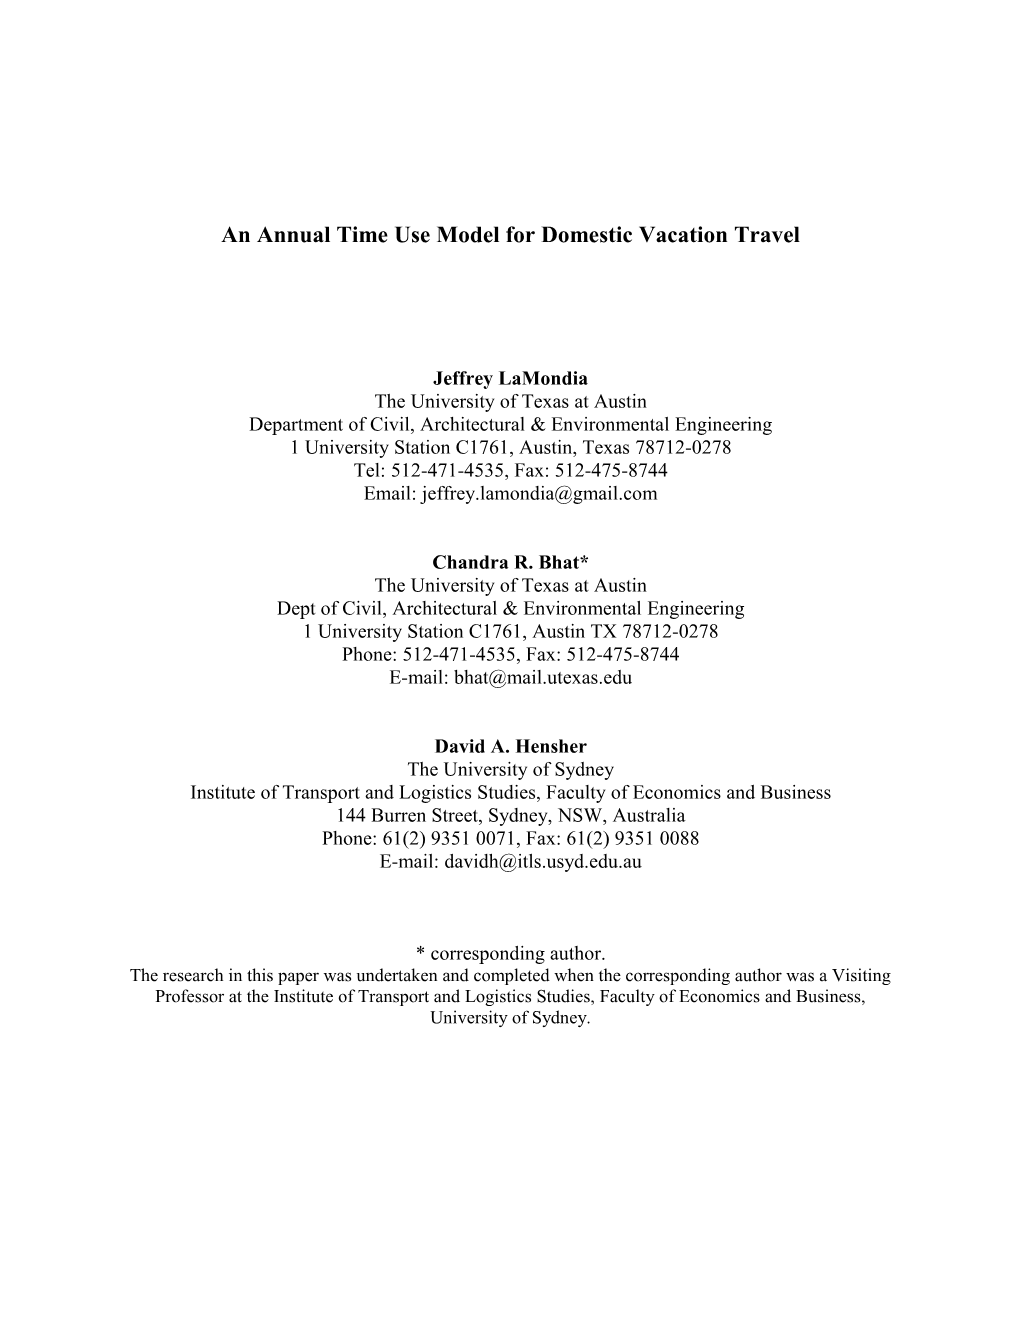 A Time Use Analysis of Long Distance Leisure Vacation Travel